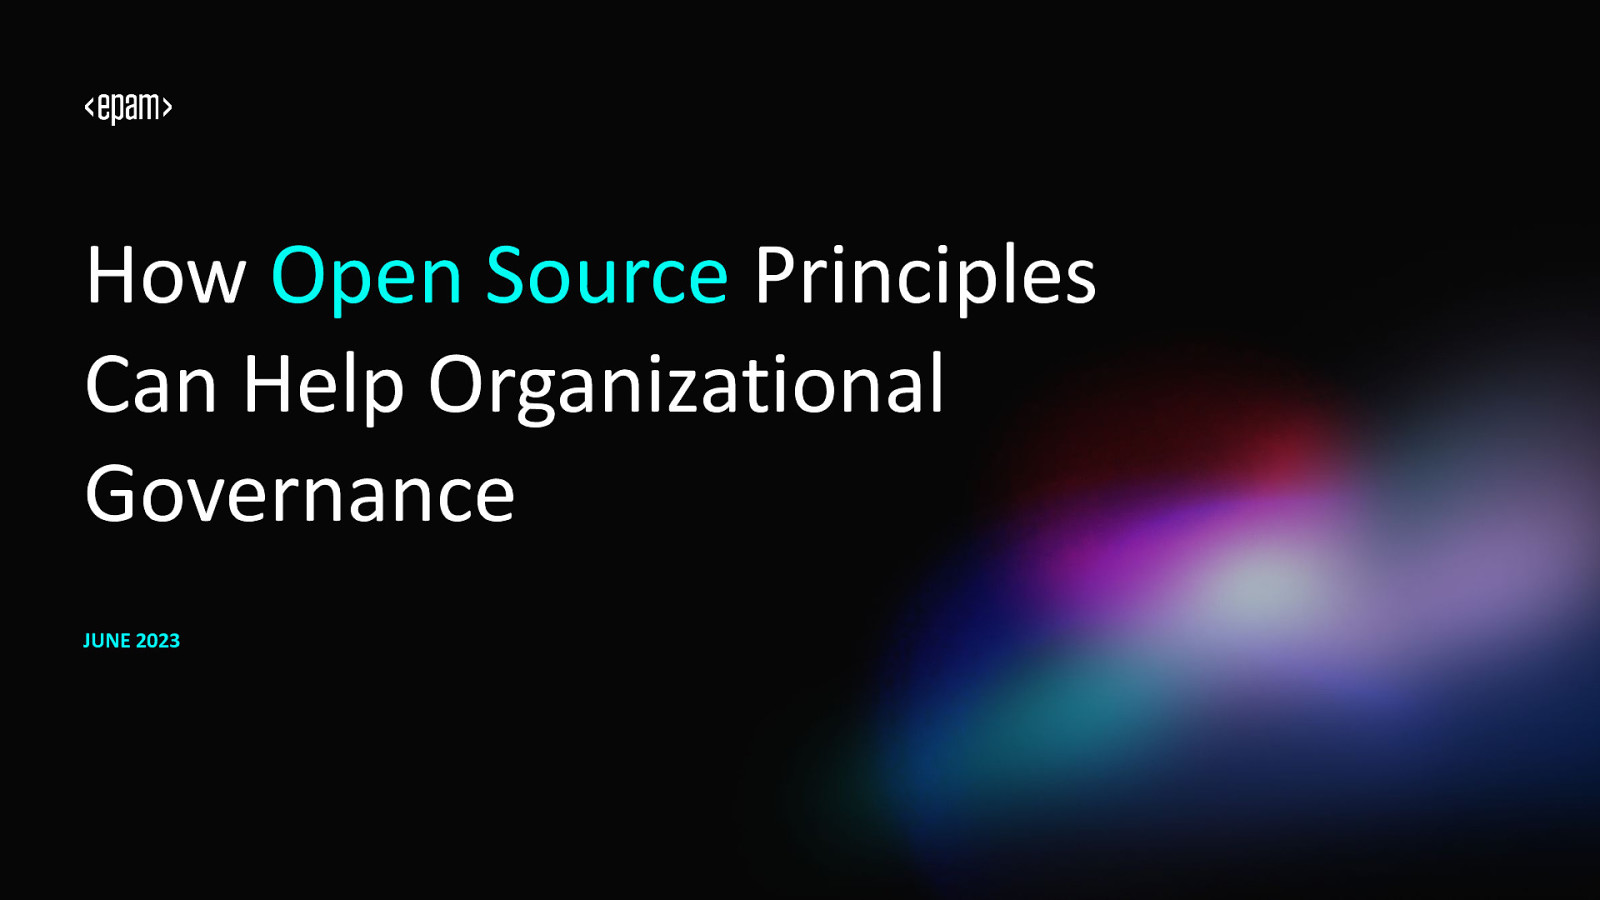 How Open Source Principles Can Help Organizational Governance